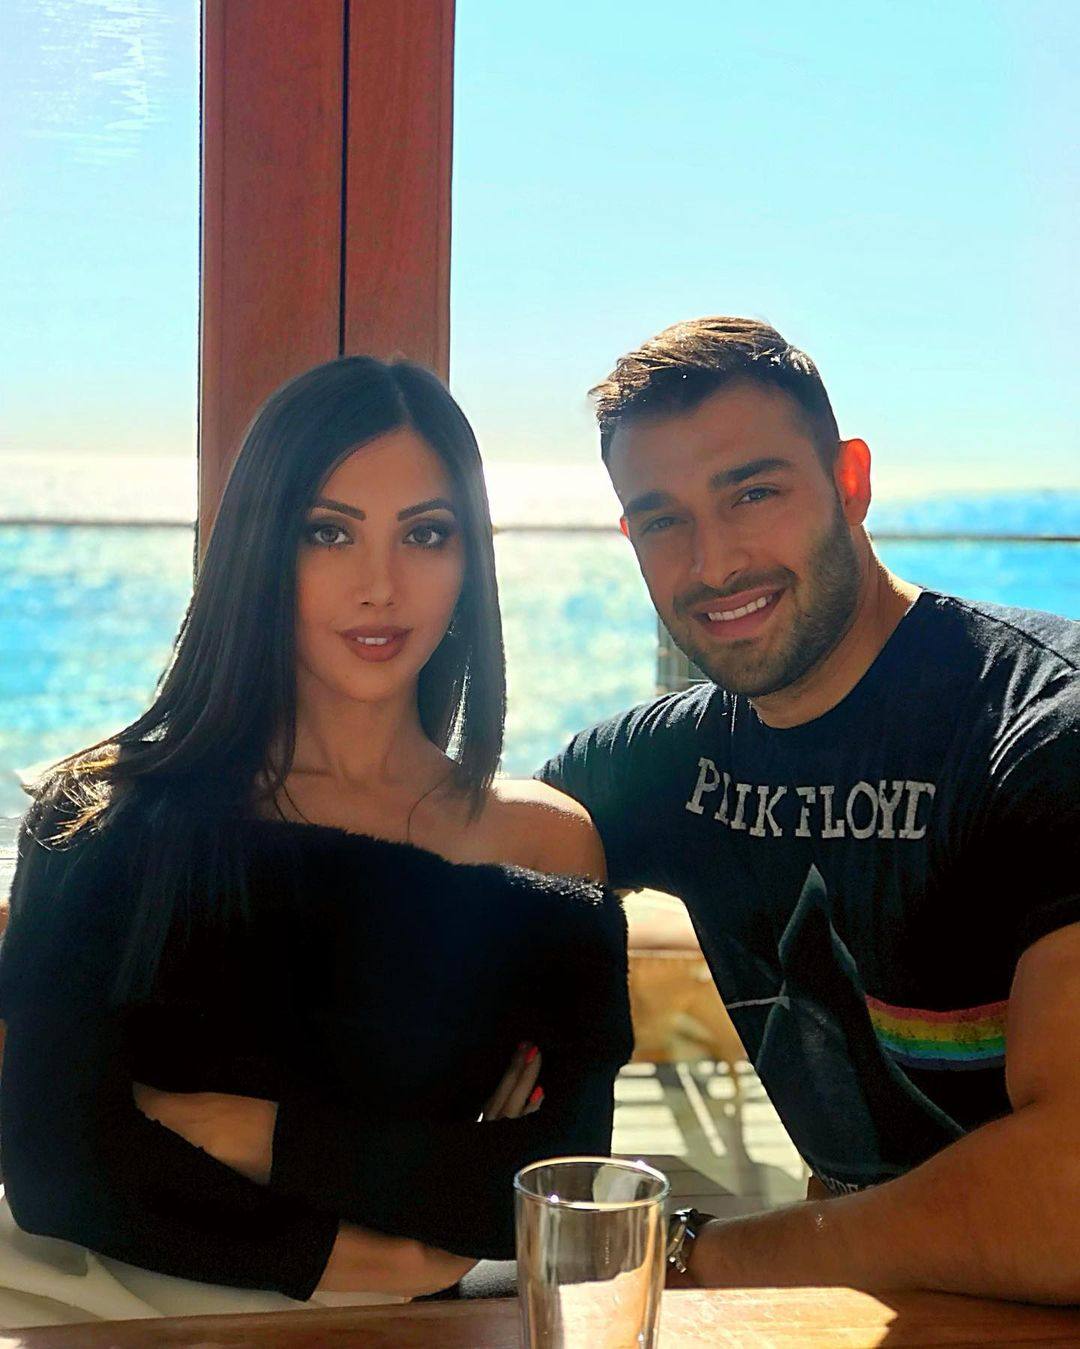 Sam Asghari with his sister Fay. Britney Spears’ ex has been spending more time with family since their split. Photo: @fayasgharii/Instagram